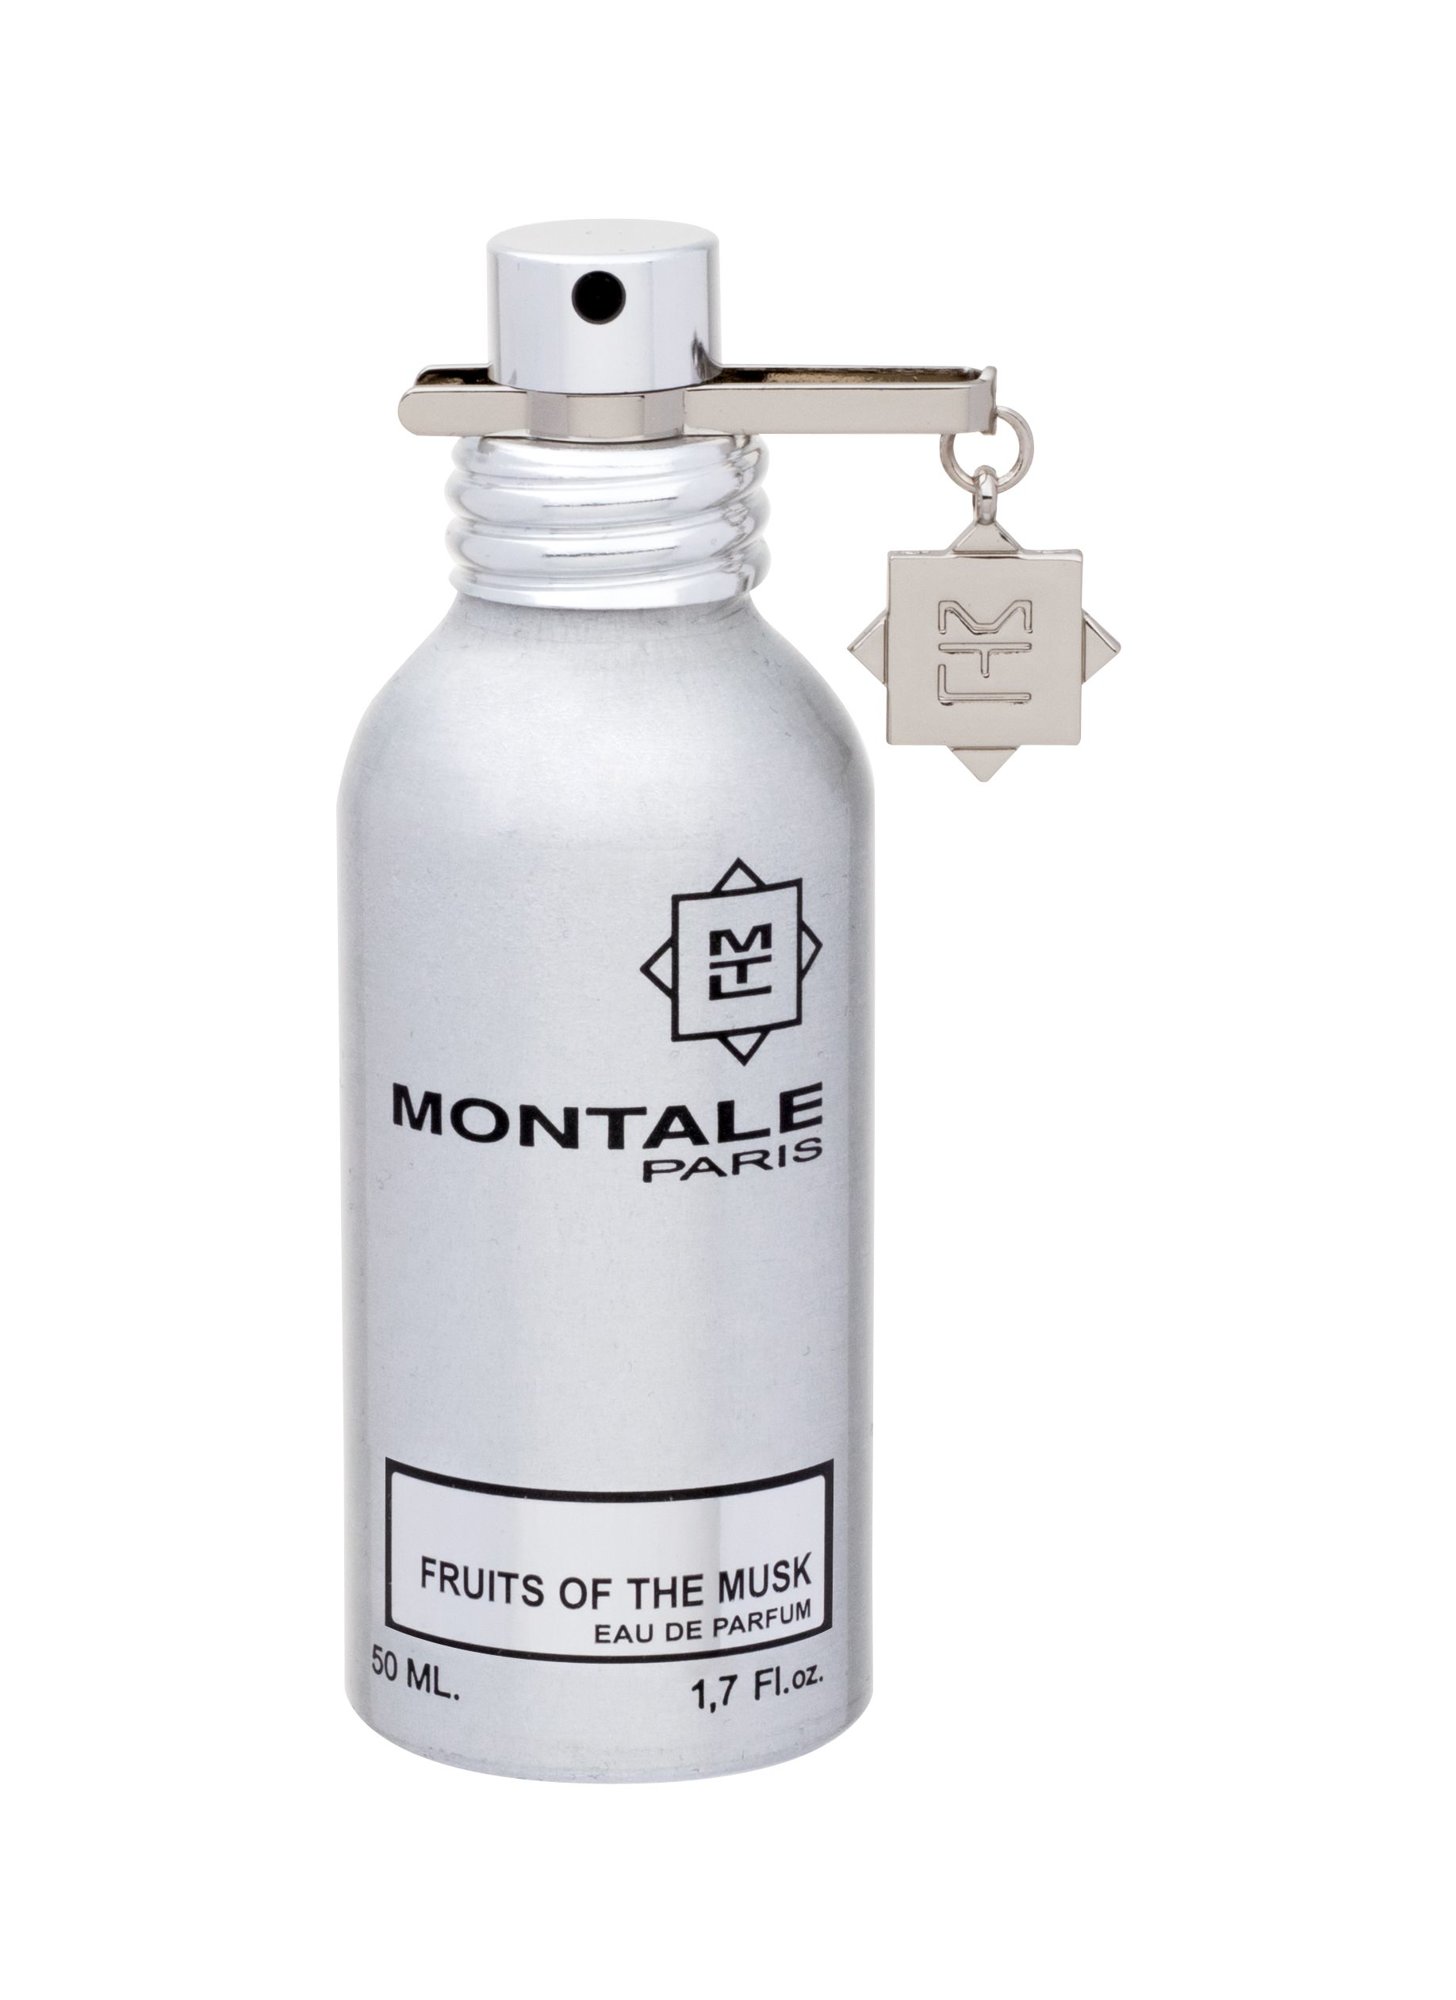 Montale Paris Fruits of the Musk